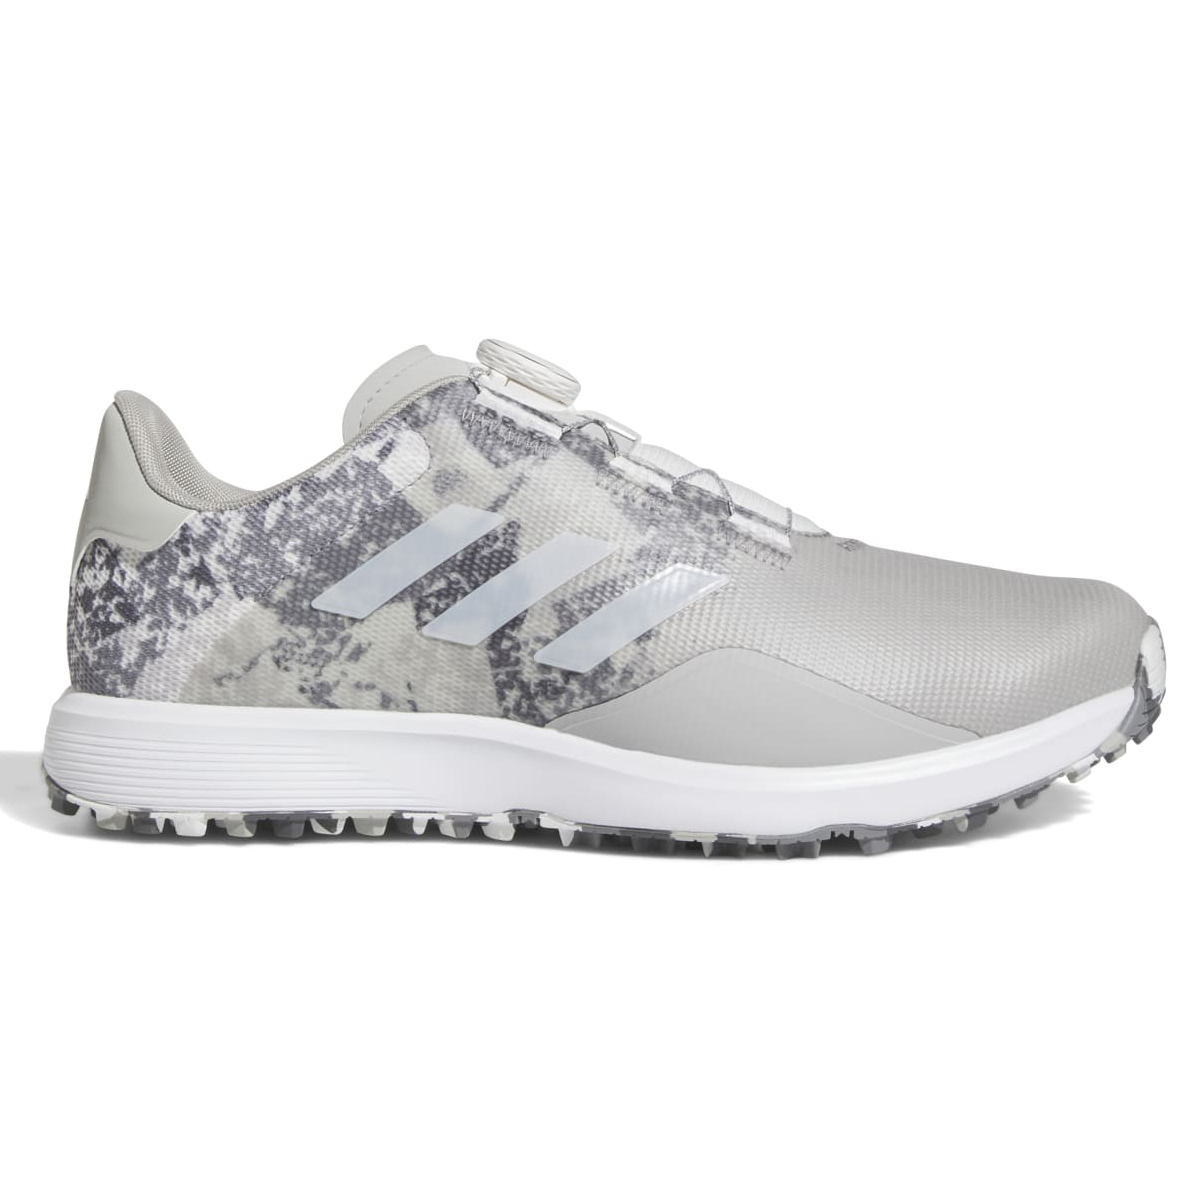 adidas S2G SL BOA 23 Mens Spikeless Golf Shoes  - Grey Two/White